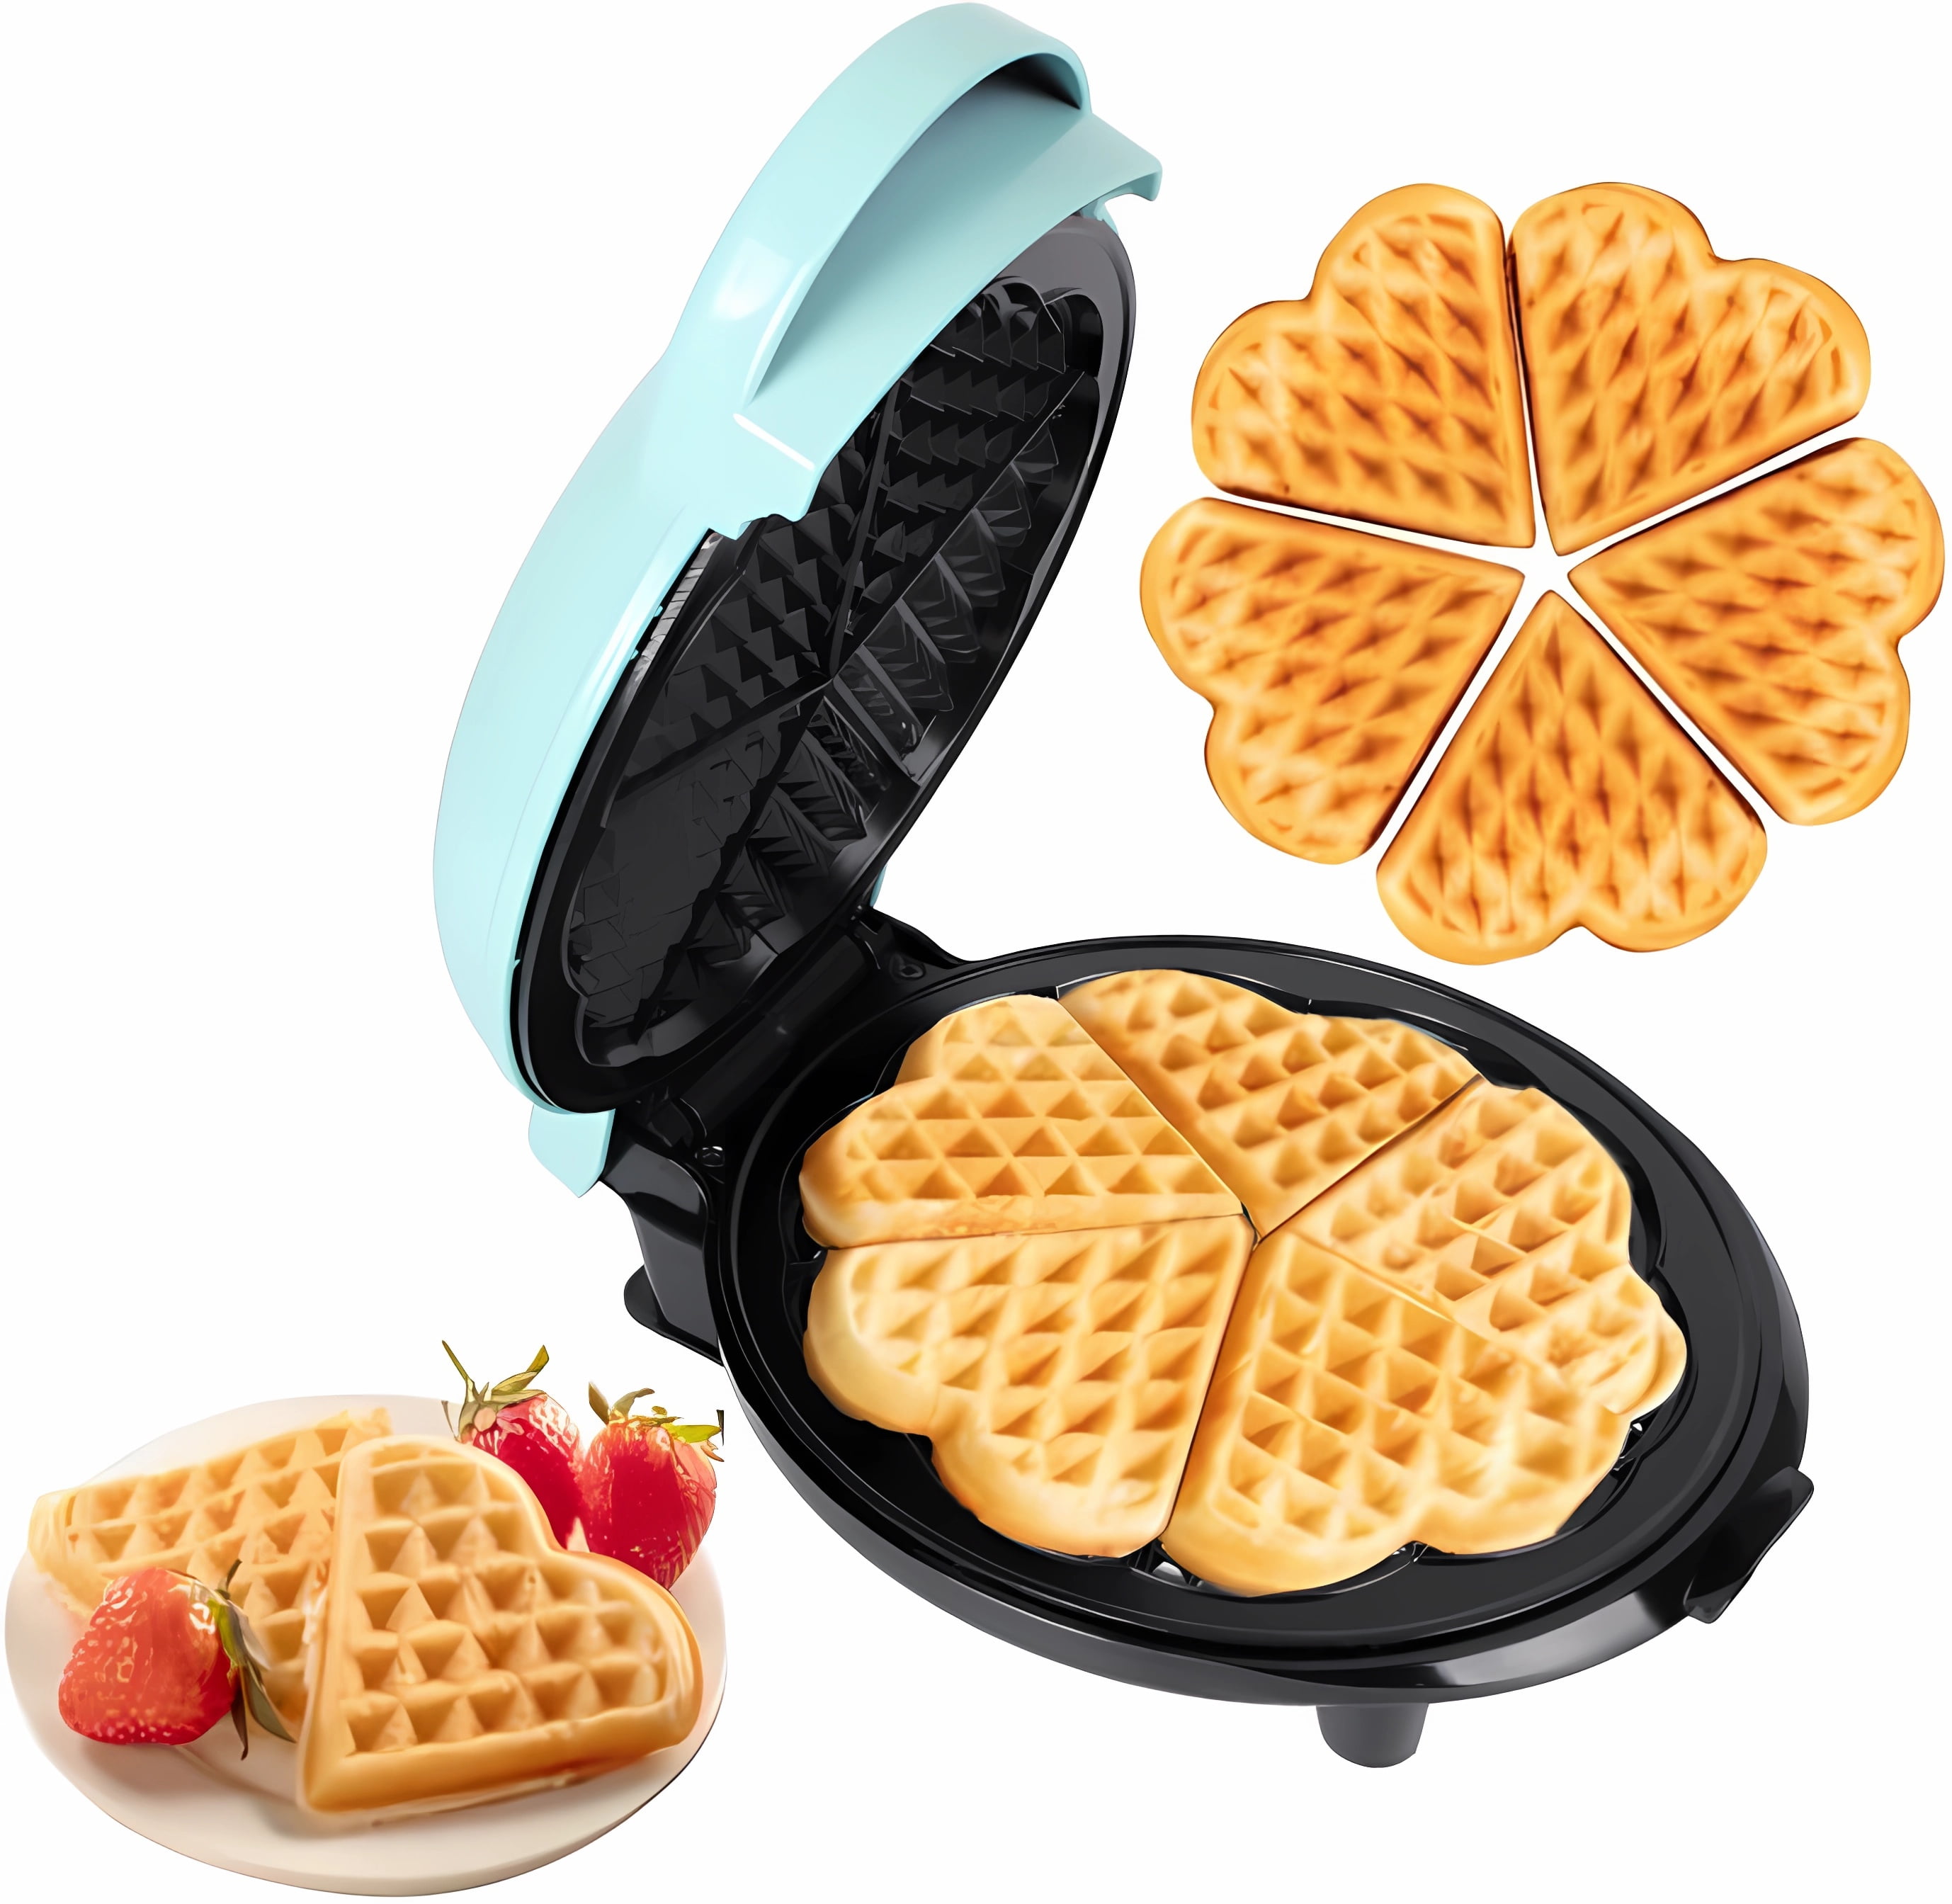  Waffle Maker by Cucina Pro - Non-Stick Waffler Iron with  Adjustable Browning Control, Griddle Makes 7 Inch Thin, American Style  Waffles for Breakfast, Homemade Valentine Breakfast Gift for Her or Him